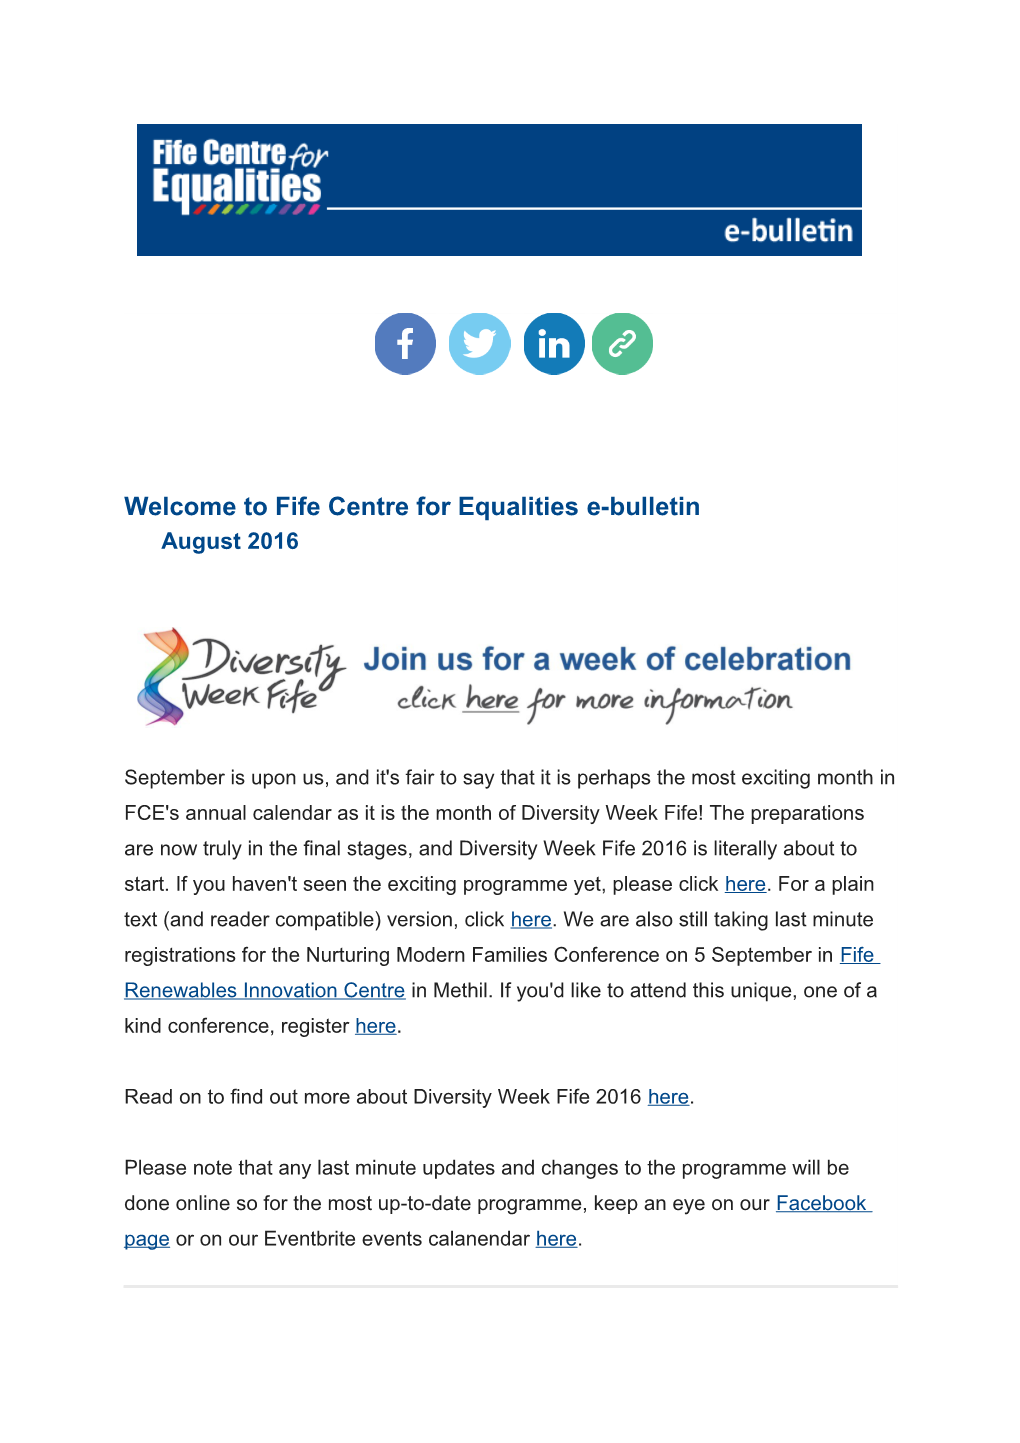 Welcome to Fife Centre for Equalitiese-Bulletinaugust 2016